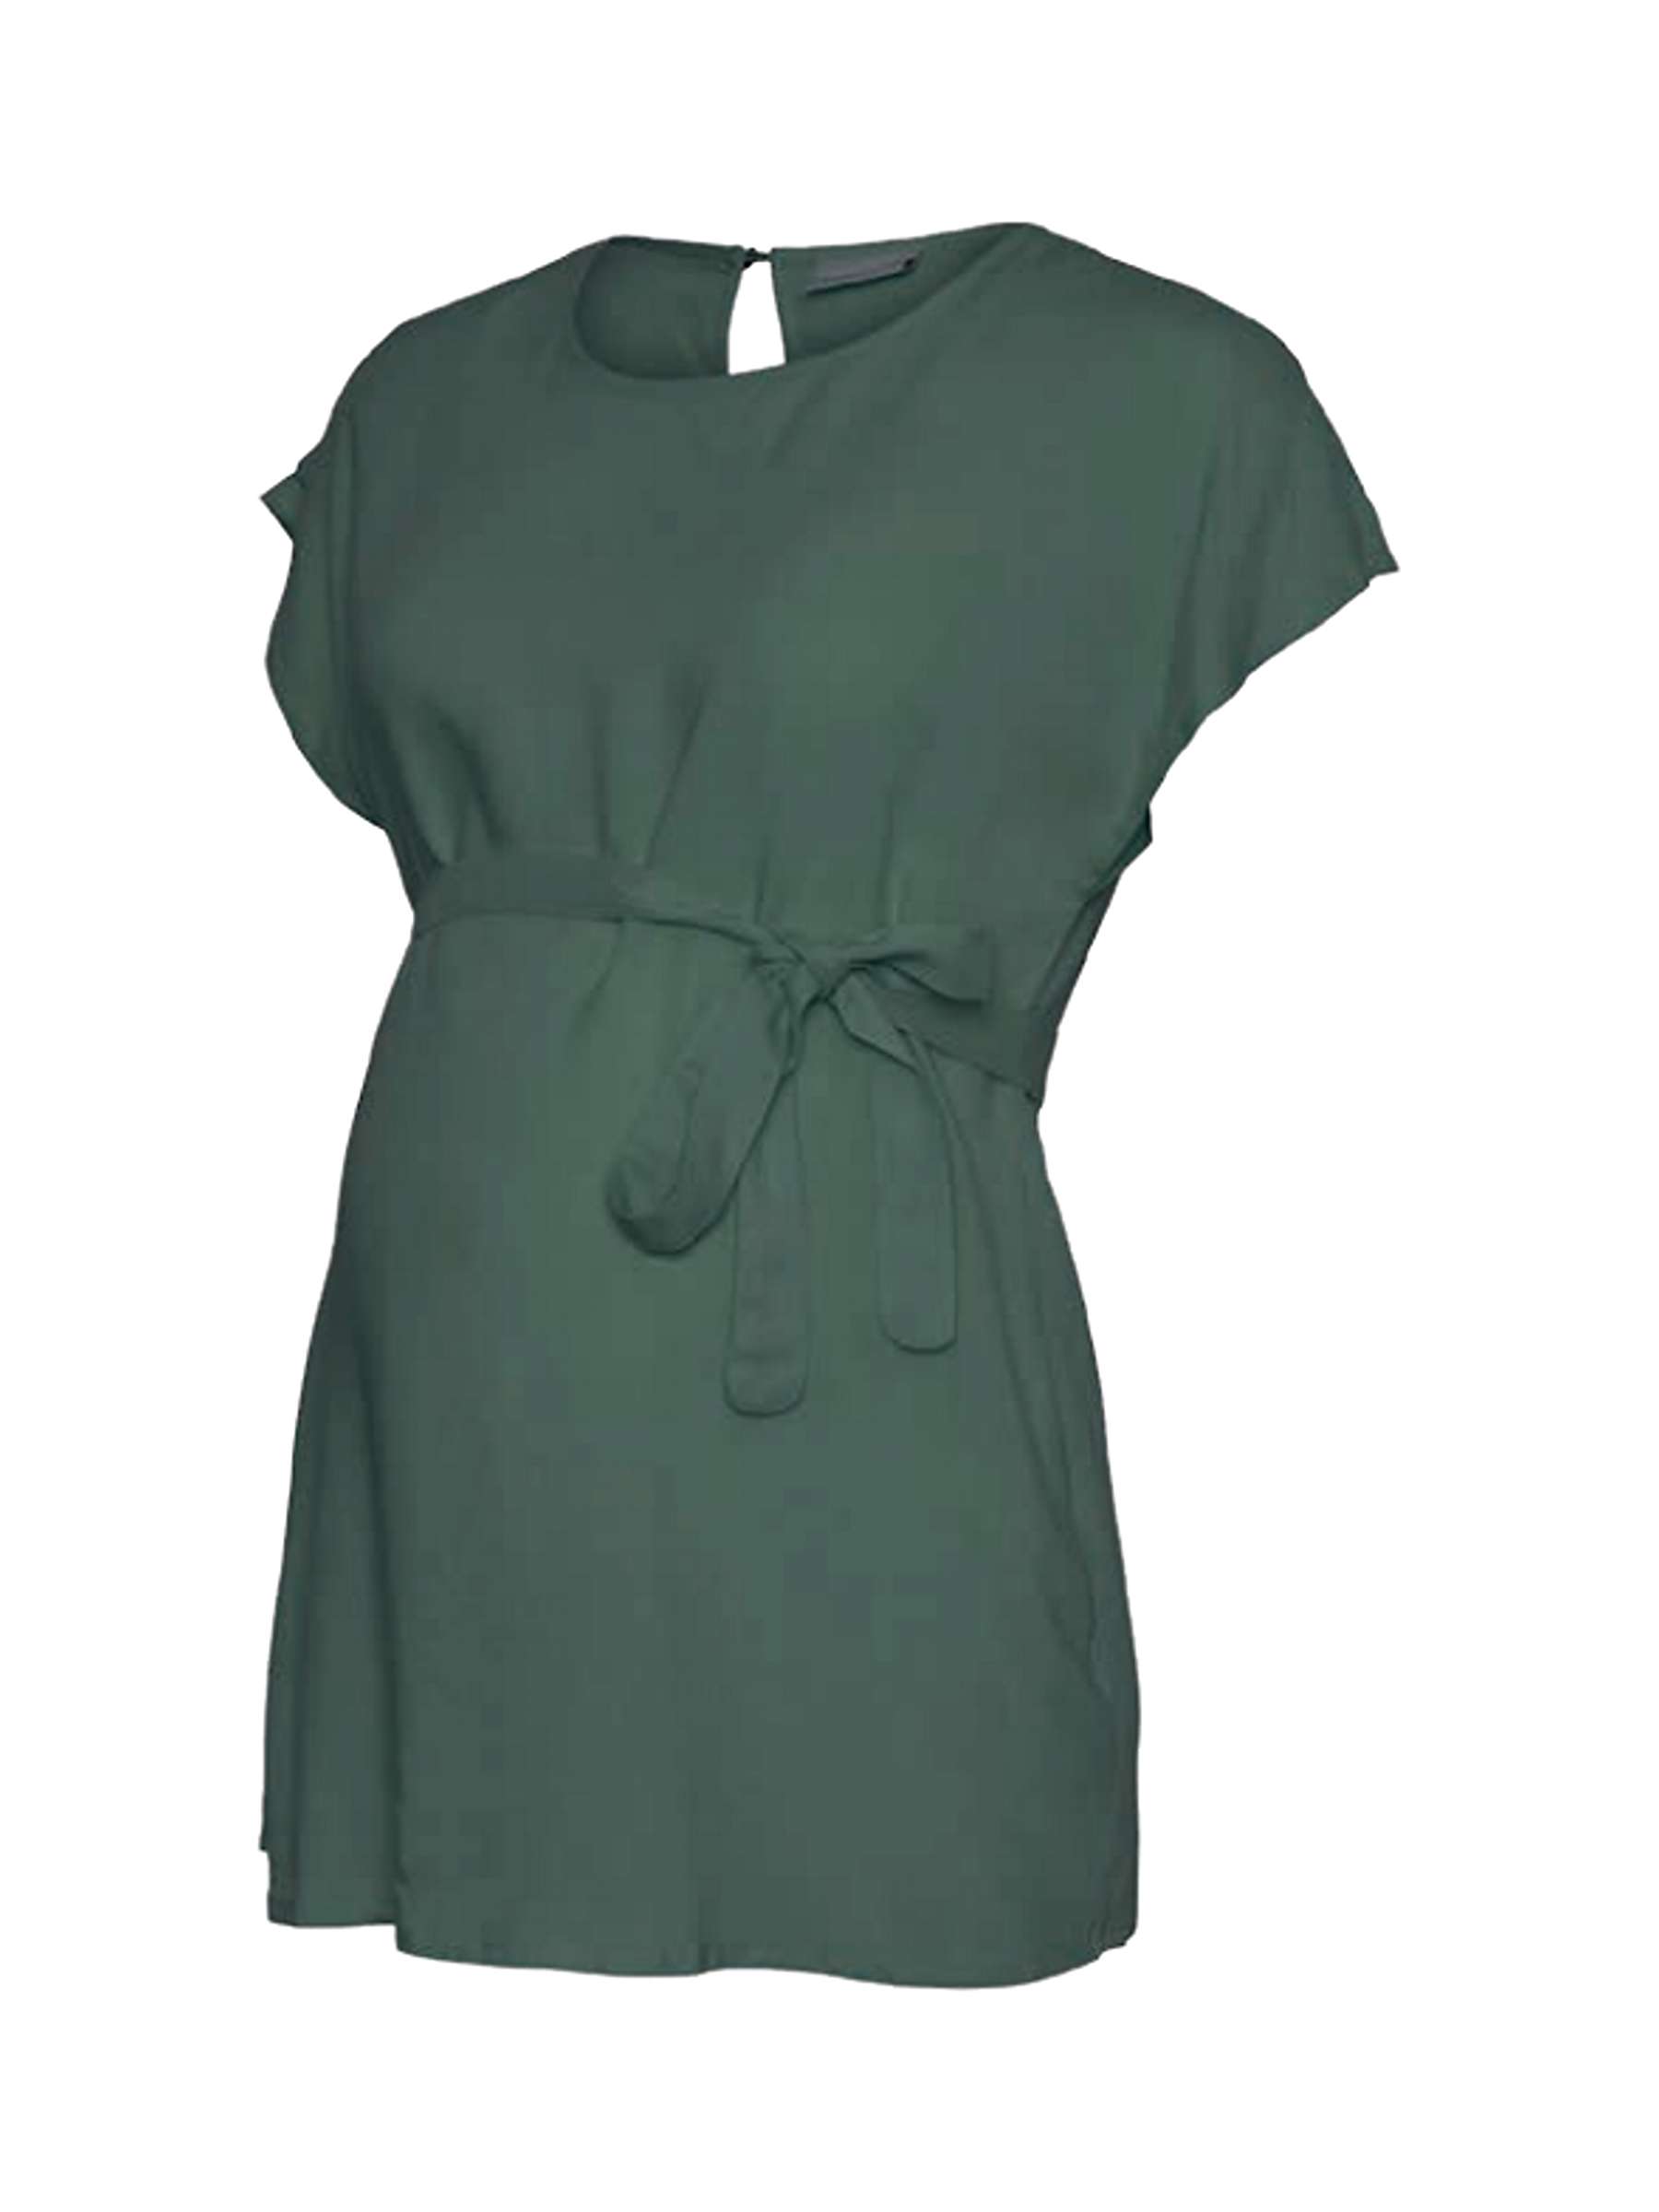 Buy Mamalicious Misty Cap Sleeve Maternity Top, Dark Forest Online at johnlewis.com